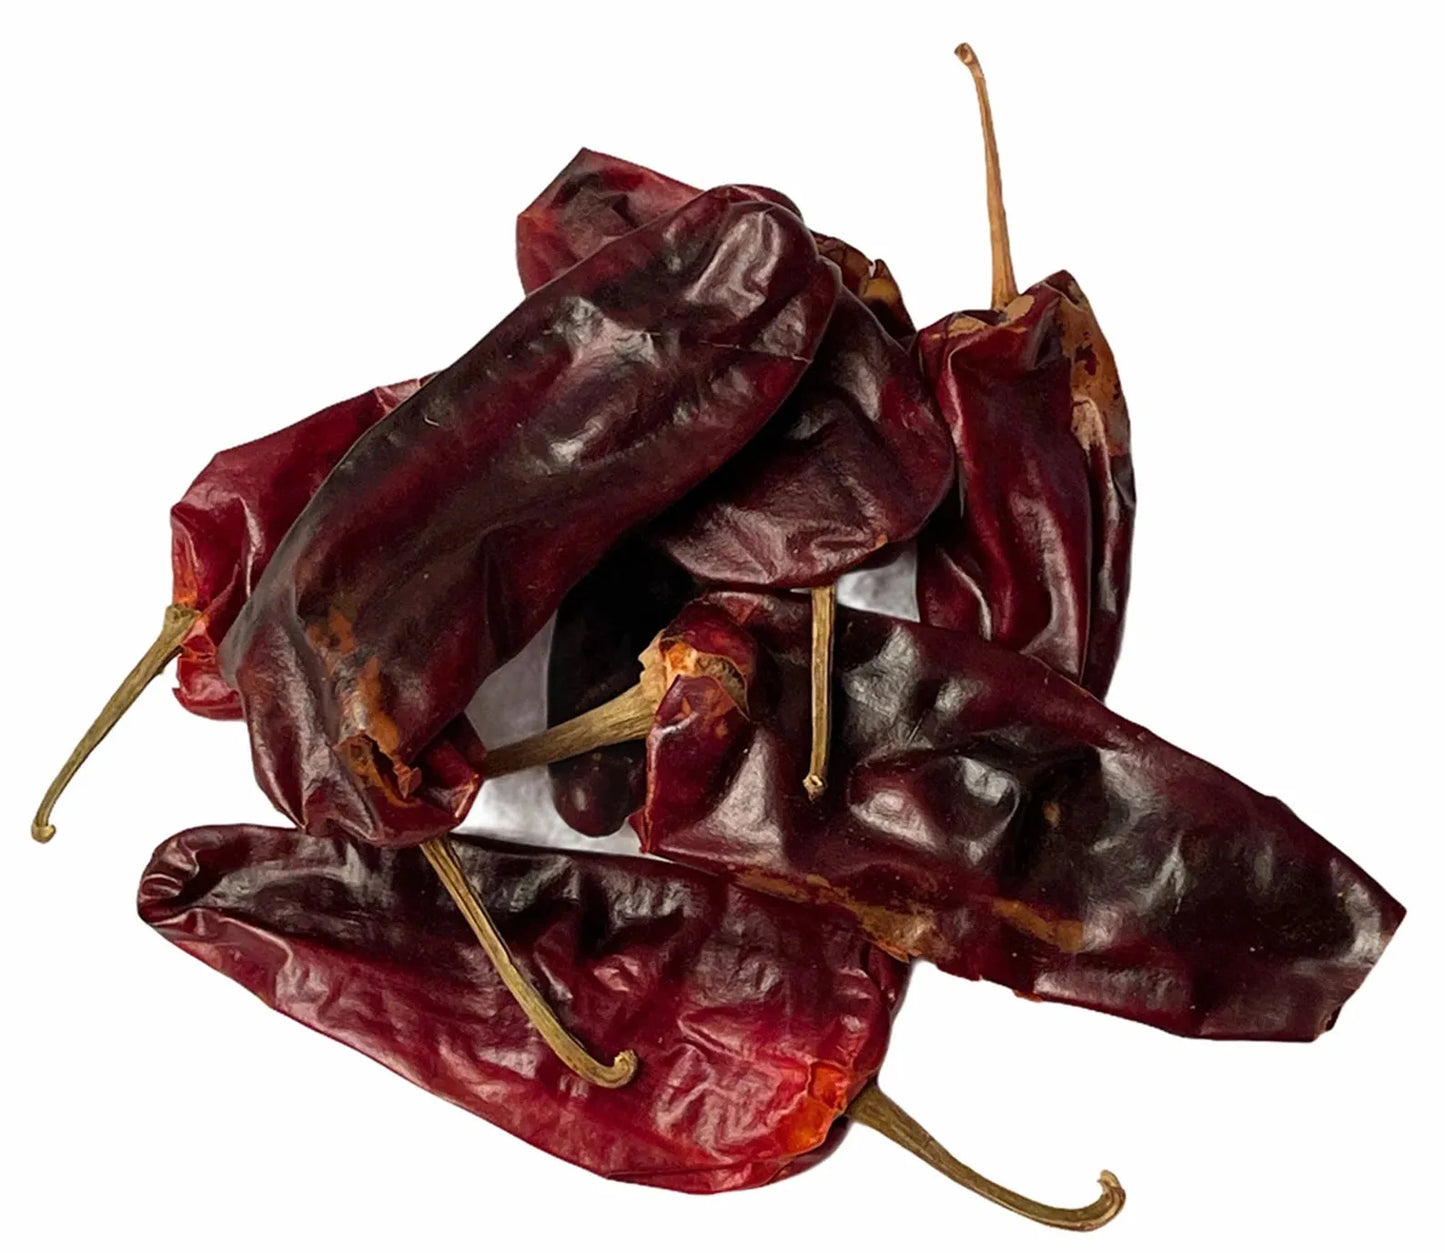 Dried Costeño Chili Peppers - Chile Costeño Seco (1 oz)